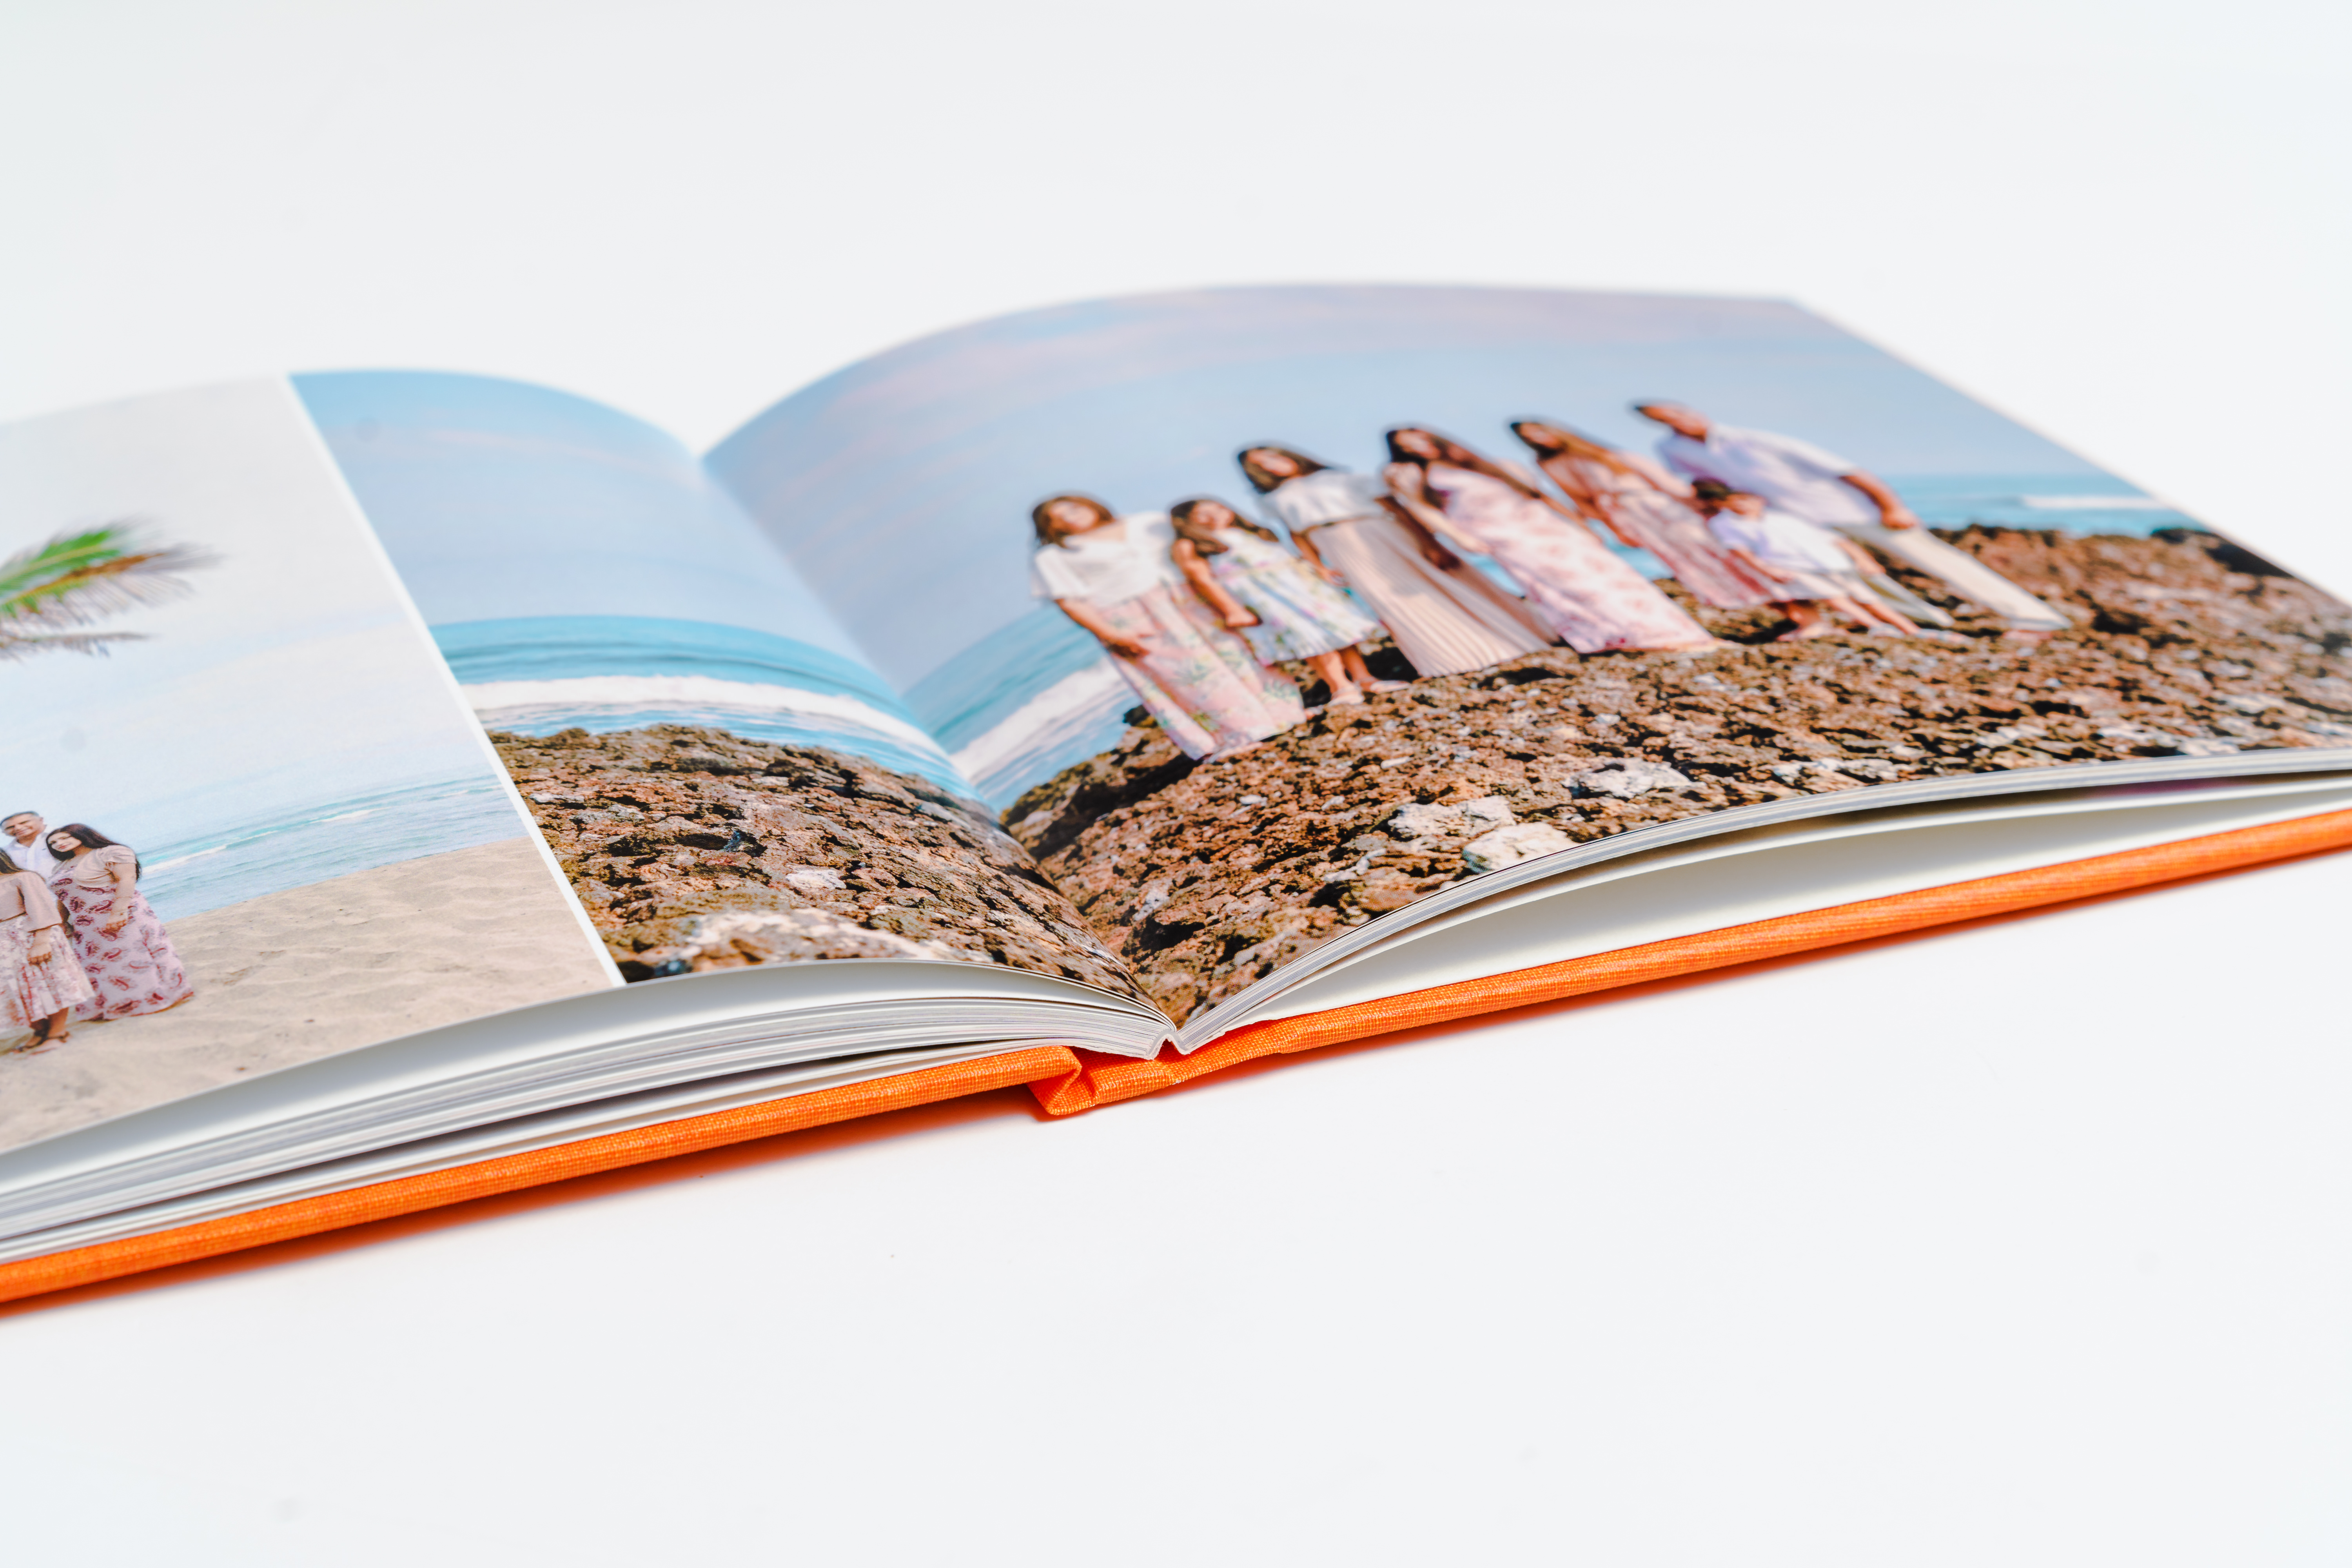 Professional photo book examples